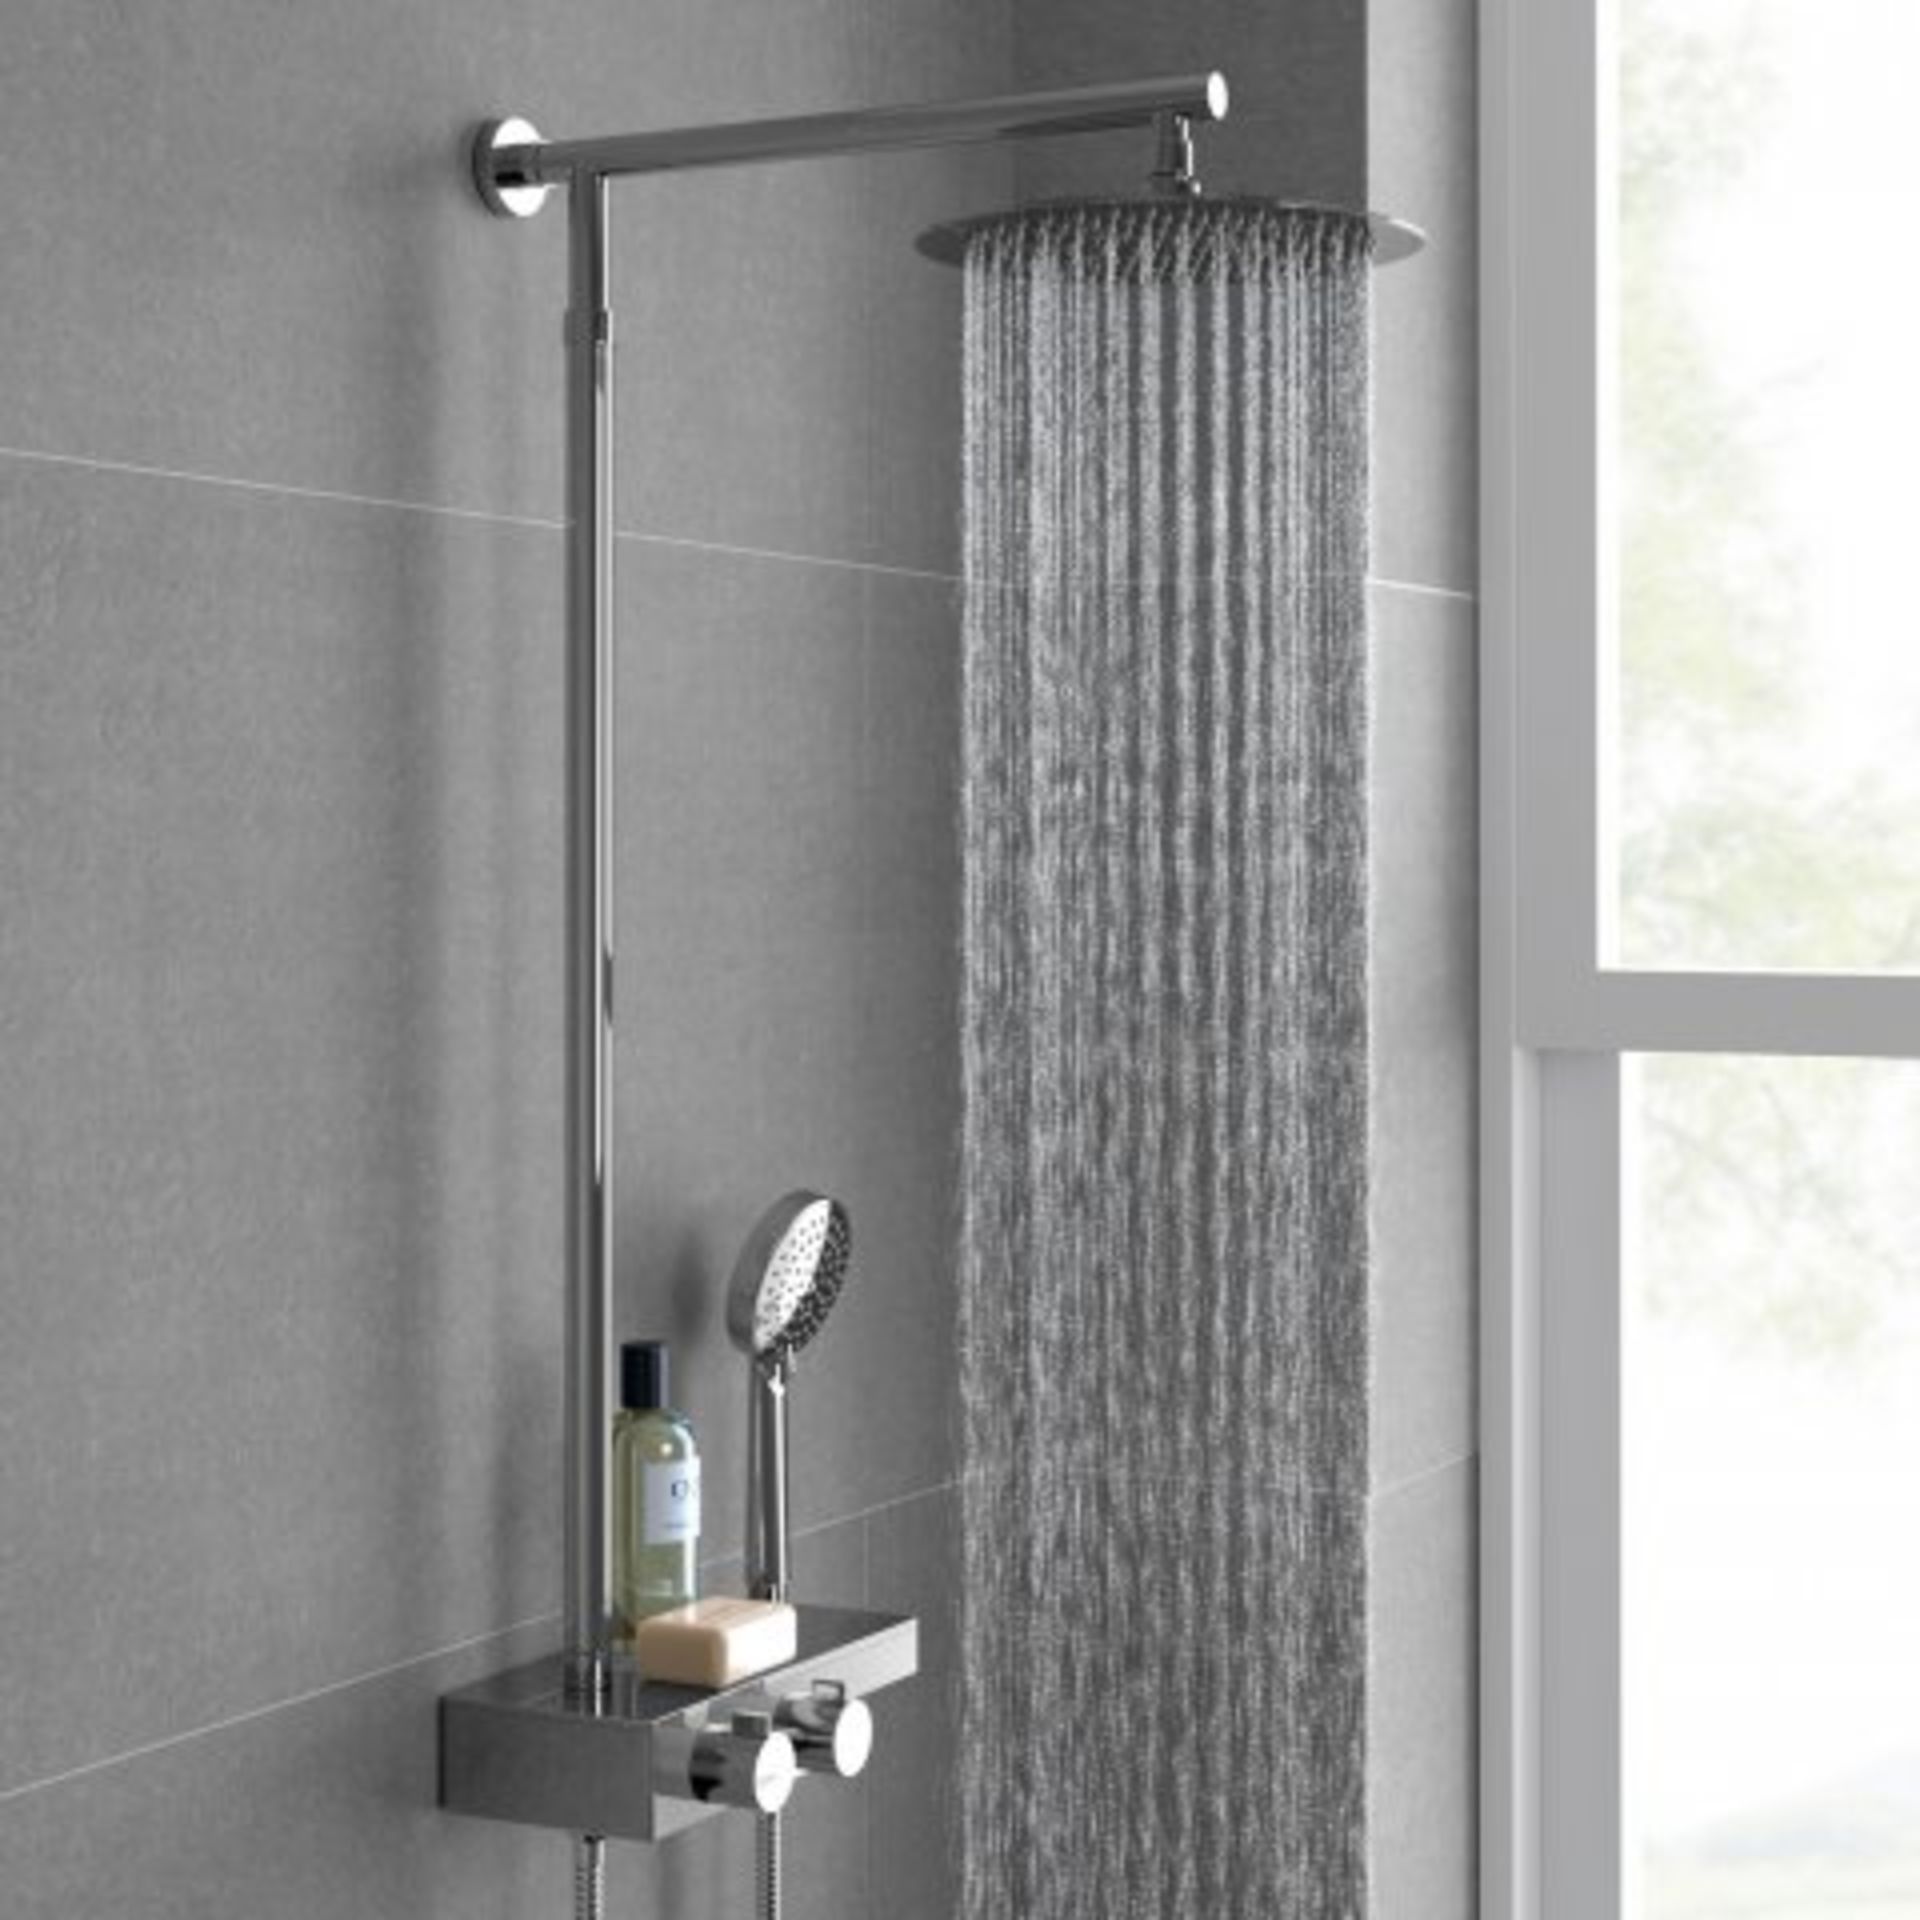 (V89) Round Exposed Thermostatic Mixer Shower Kit & Large Shower Head Designer Style Our - Image 2 of 7